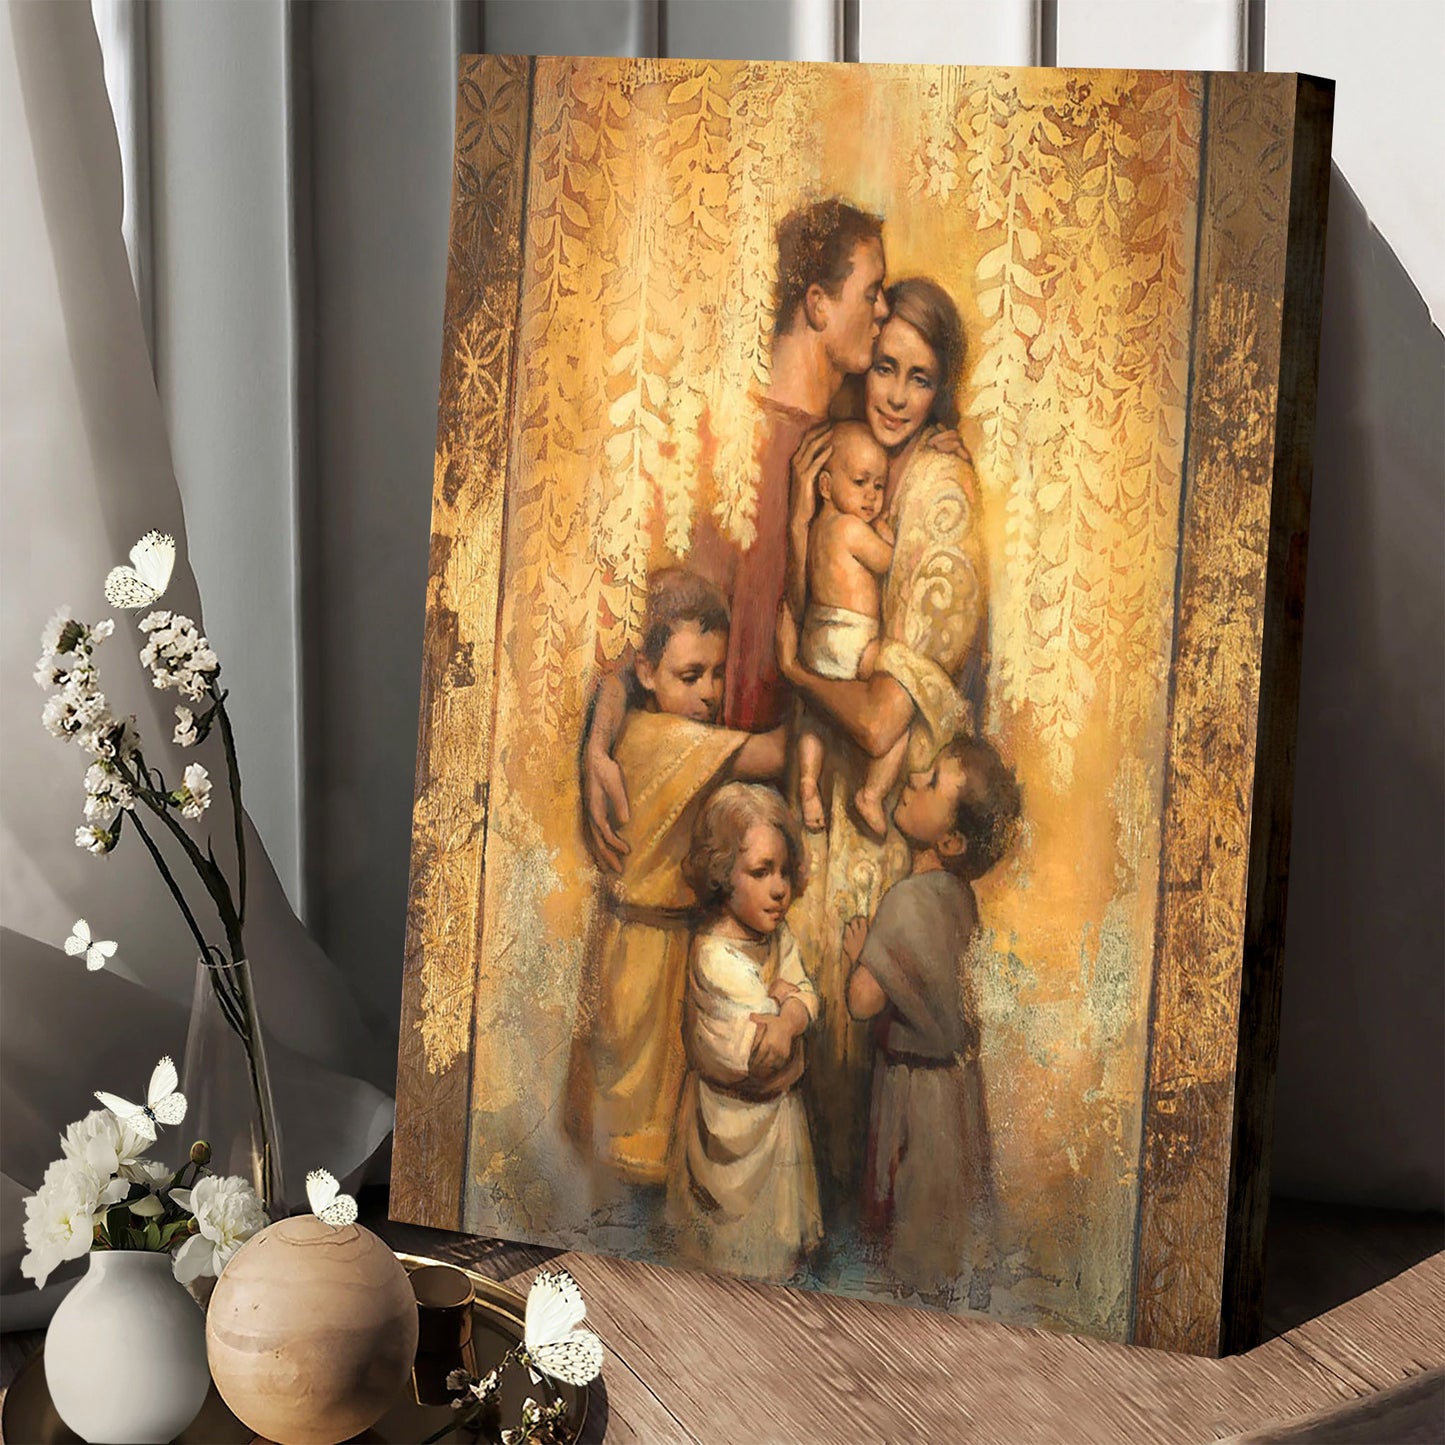 Family Canvas Picture - Jesus Canvas Wall Art - Christian Wall Art